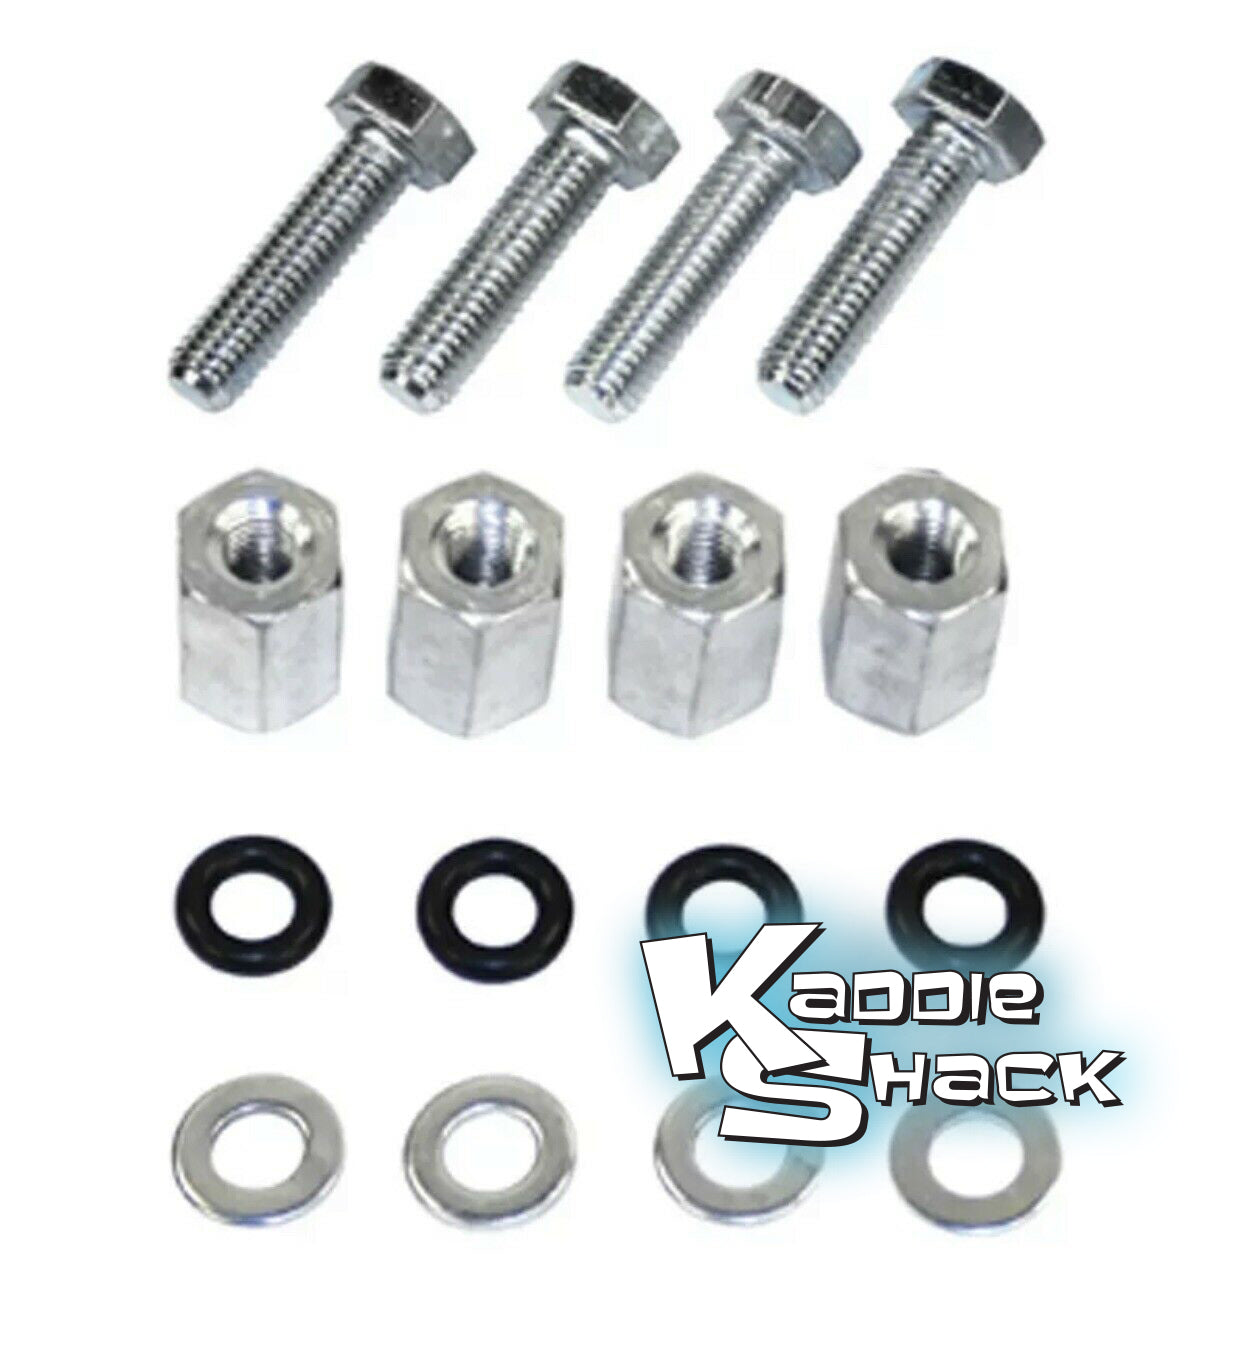 Bolt-On Valve Cover Replacement Hardware Kit